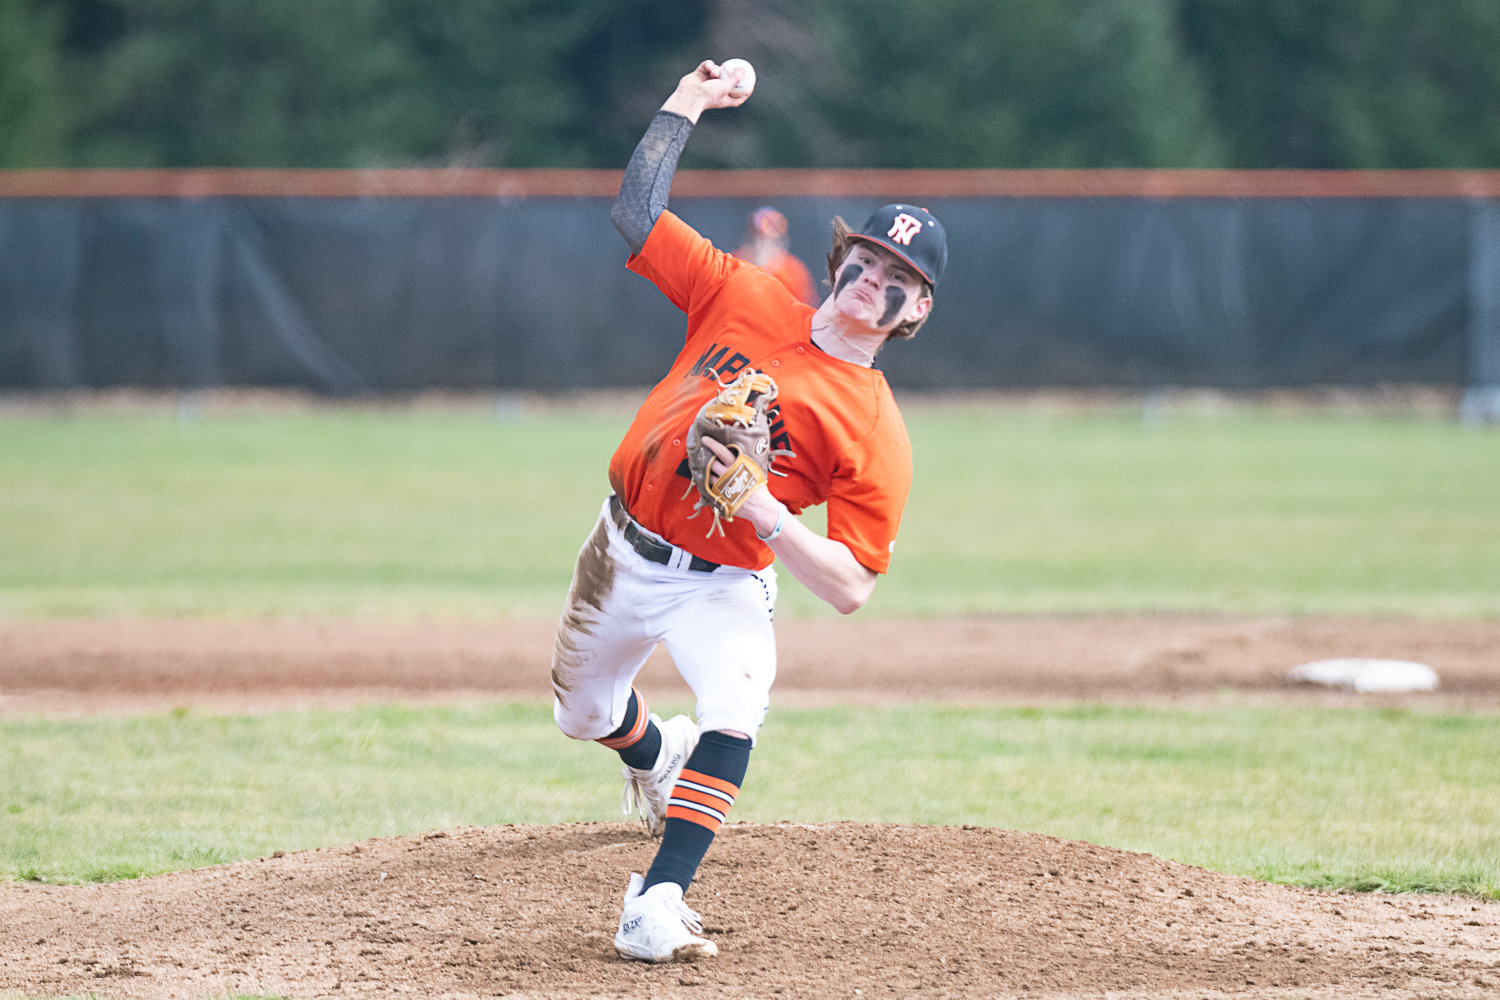 Connor Holmes throws a pitch during Napavine's 4-1 loss to Toledo on March 20.